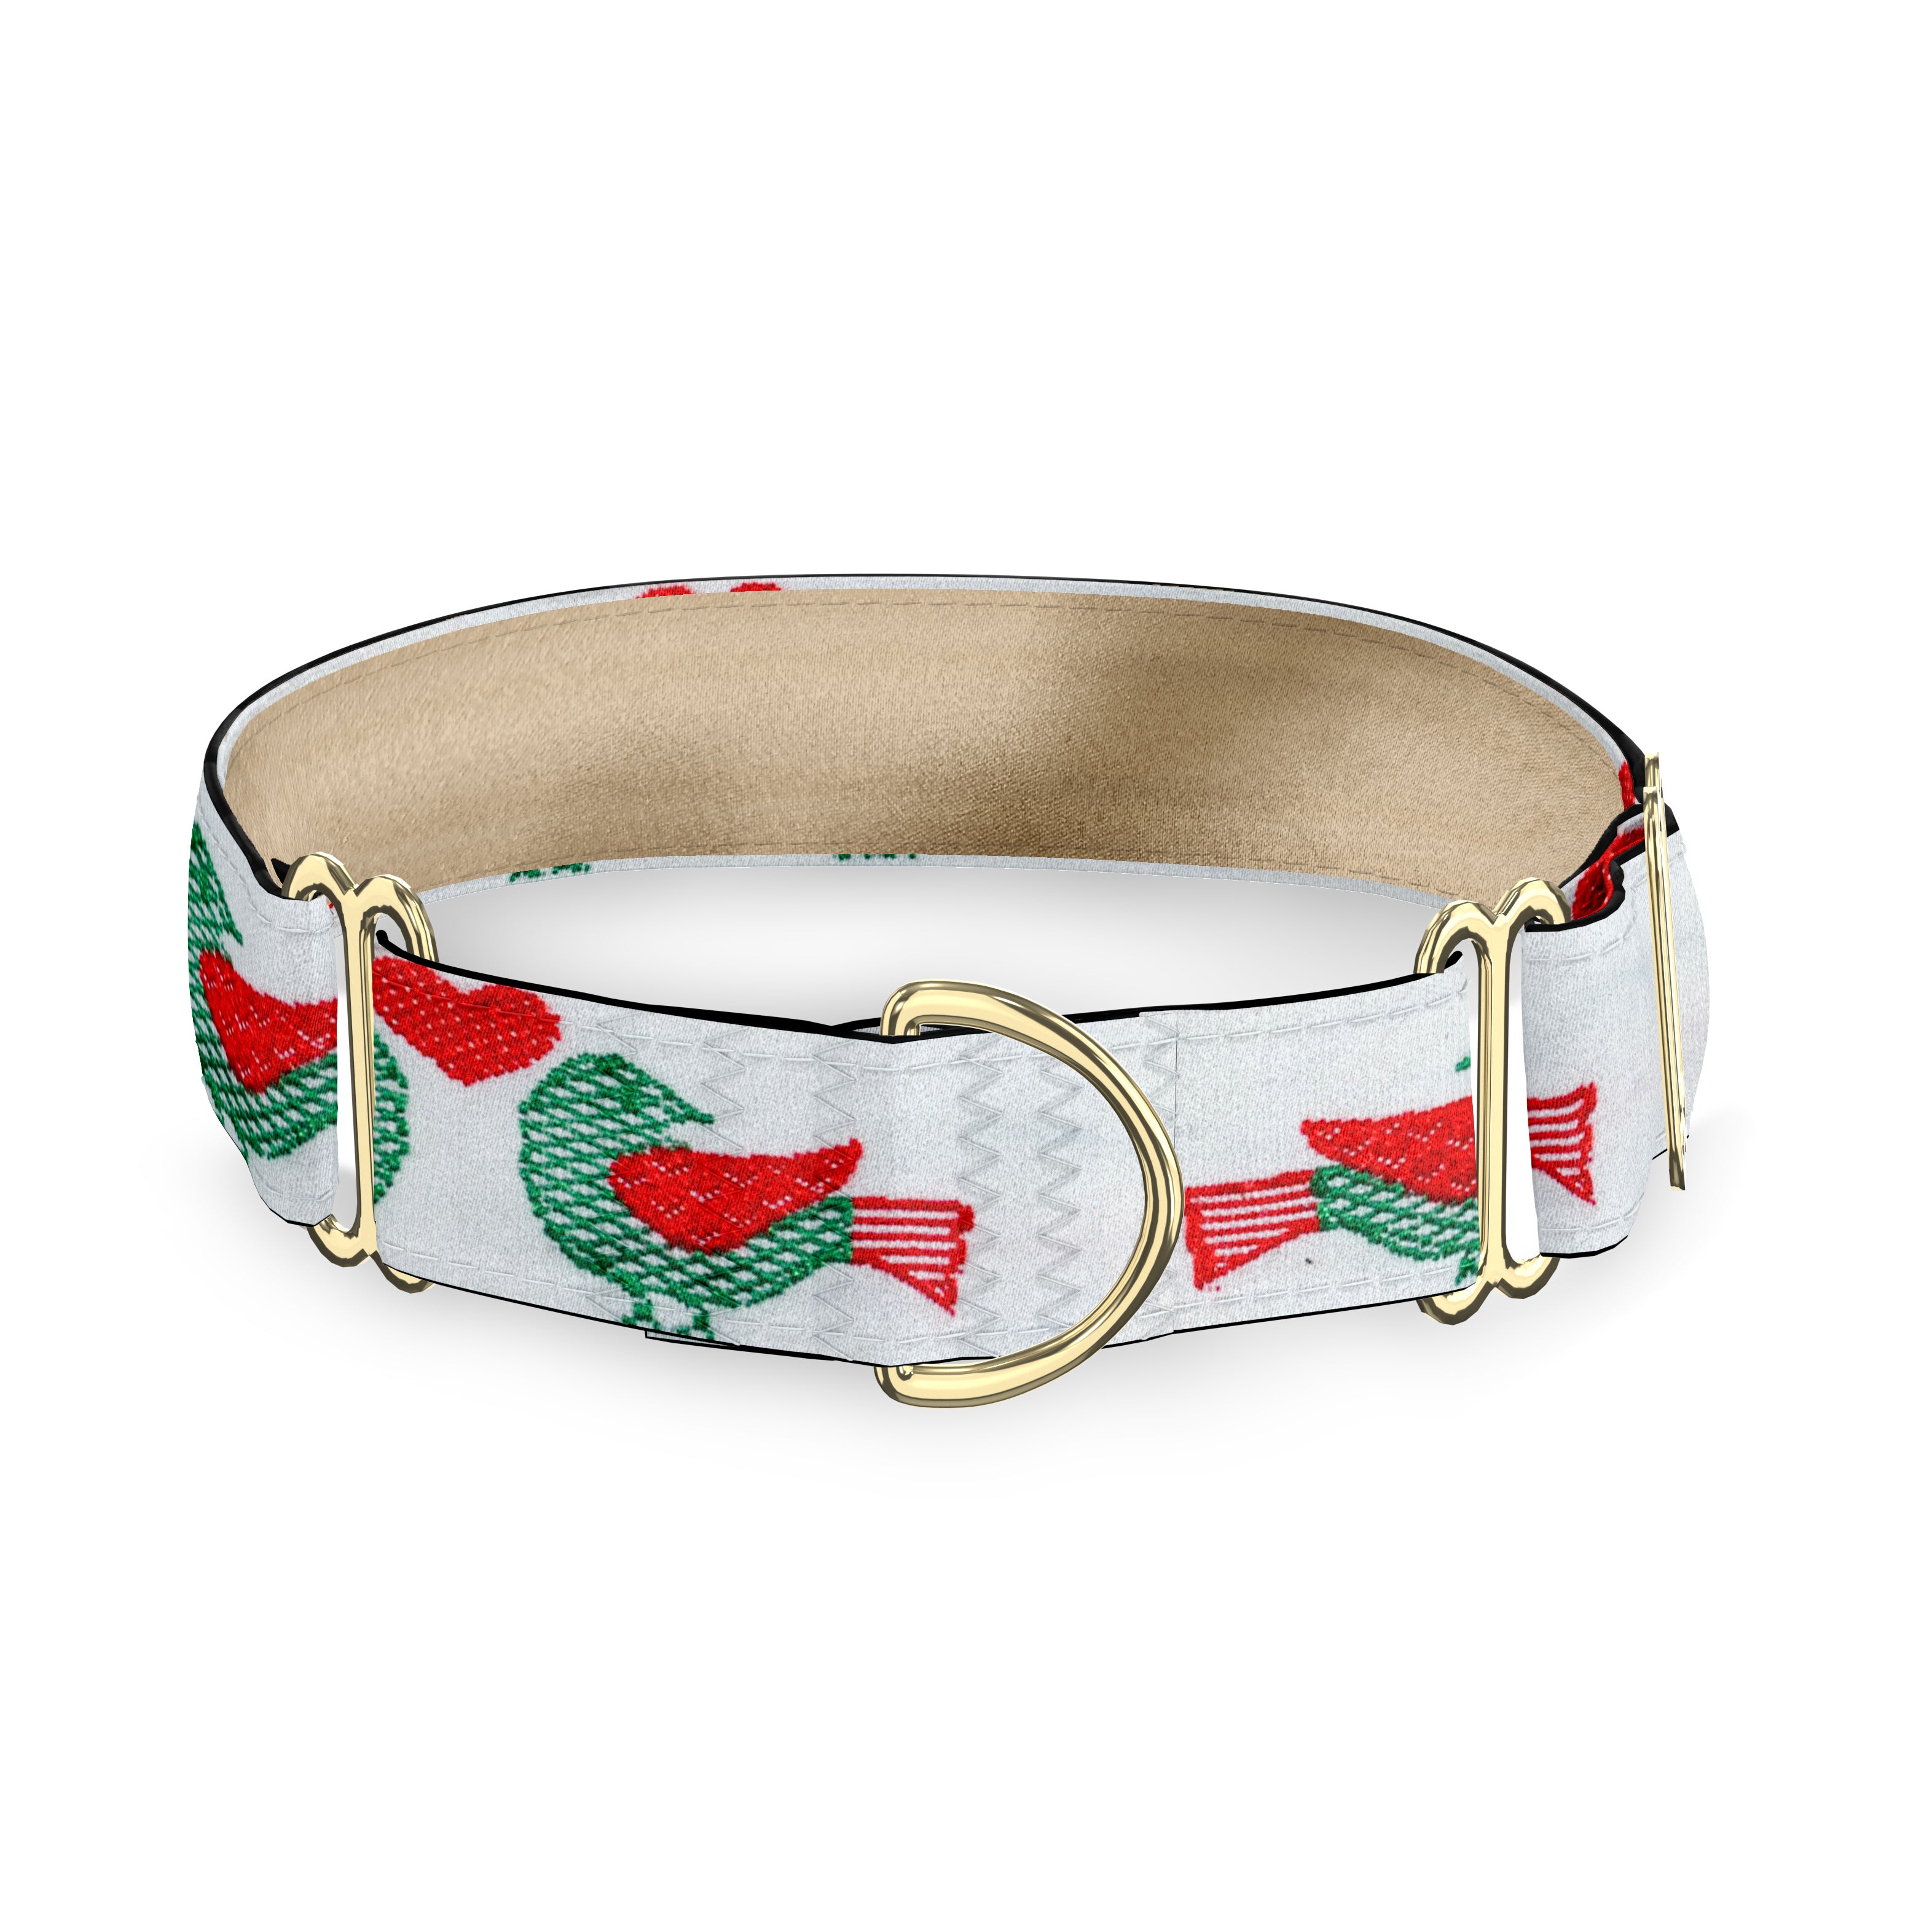 Signature Red Green Gucci Inspired Dog Collar and Leash Set